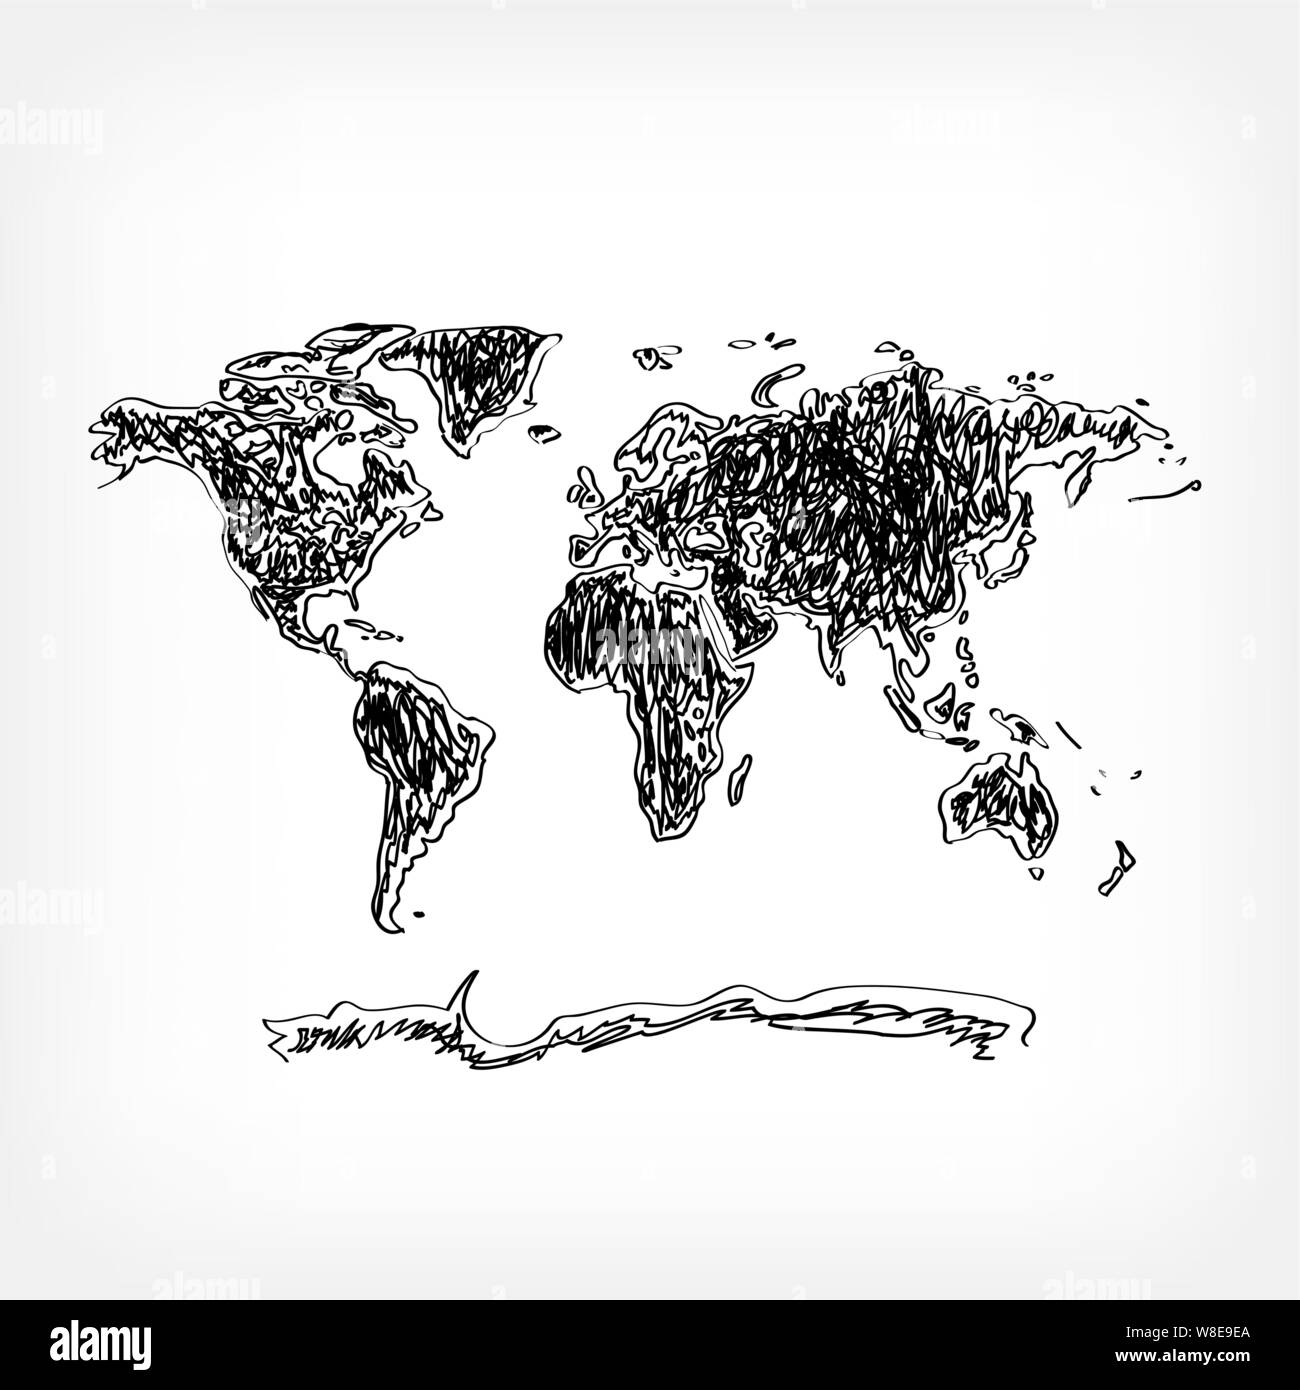 Drawing world map on white background. Drawn black color earth land continent. Ecology planet pollution Stock Vector